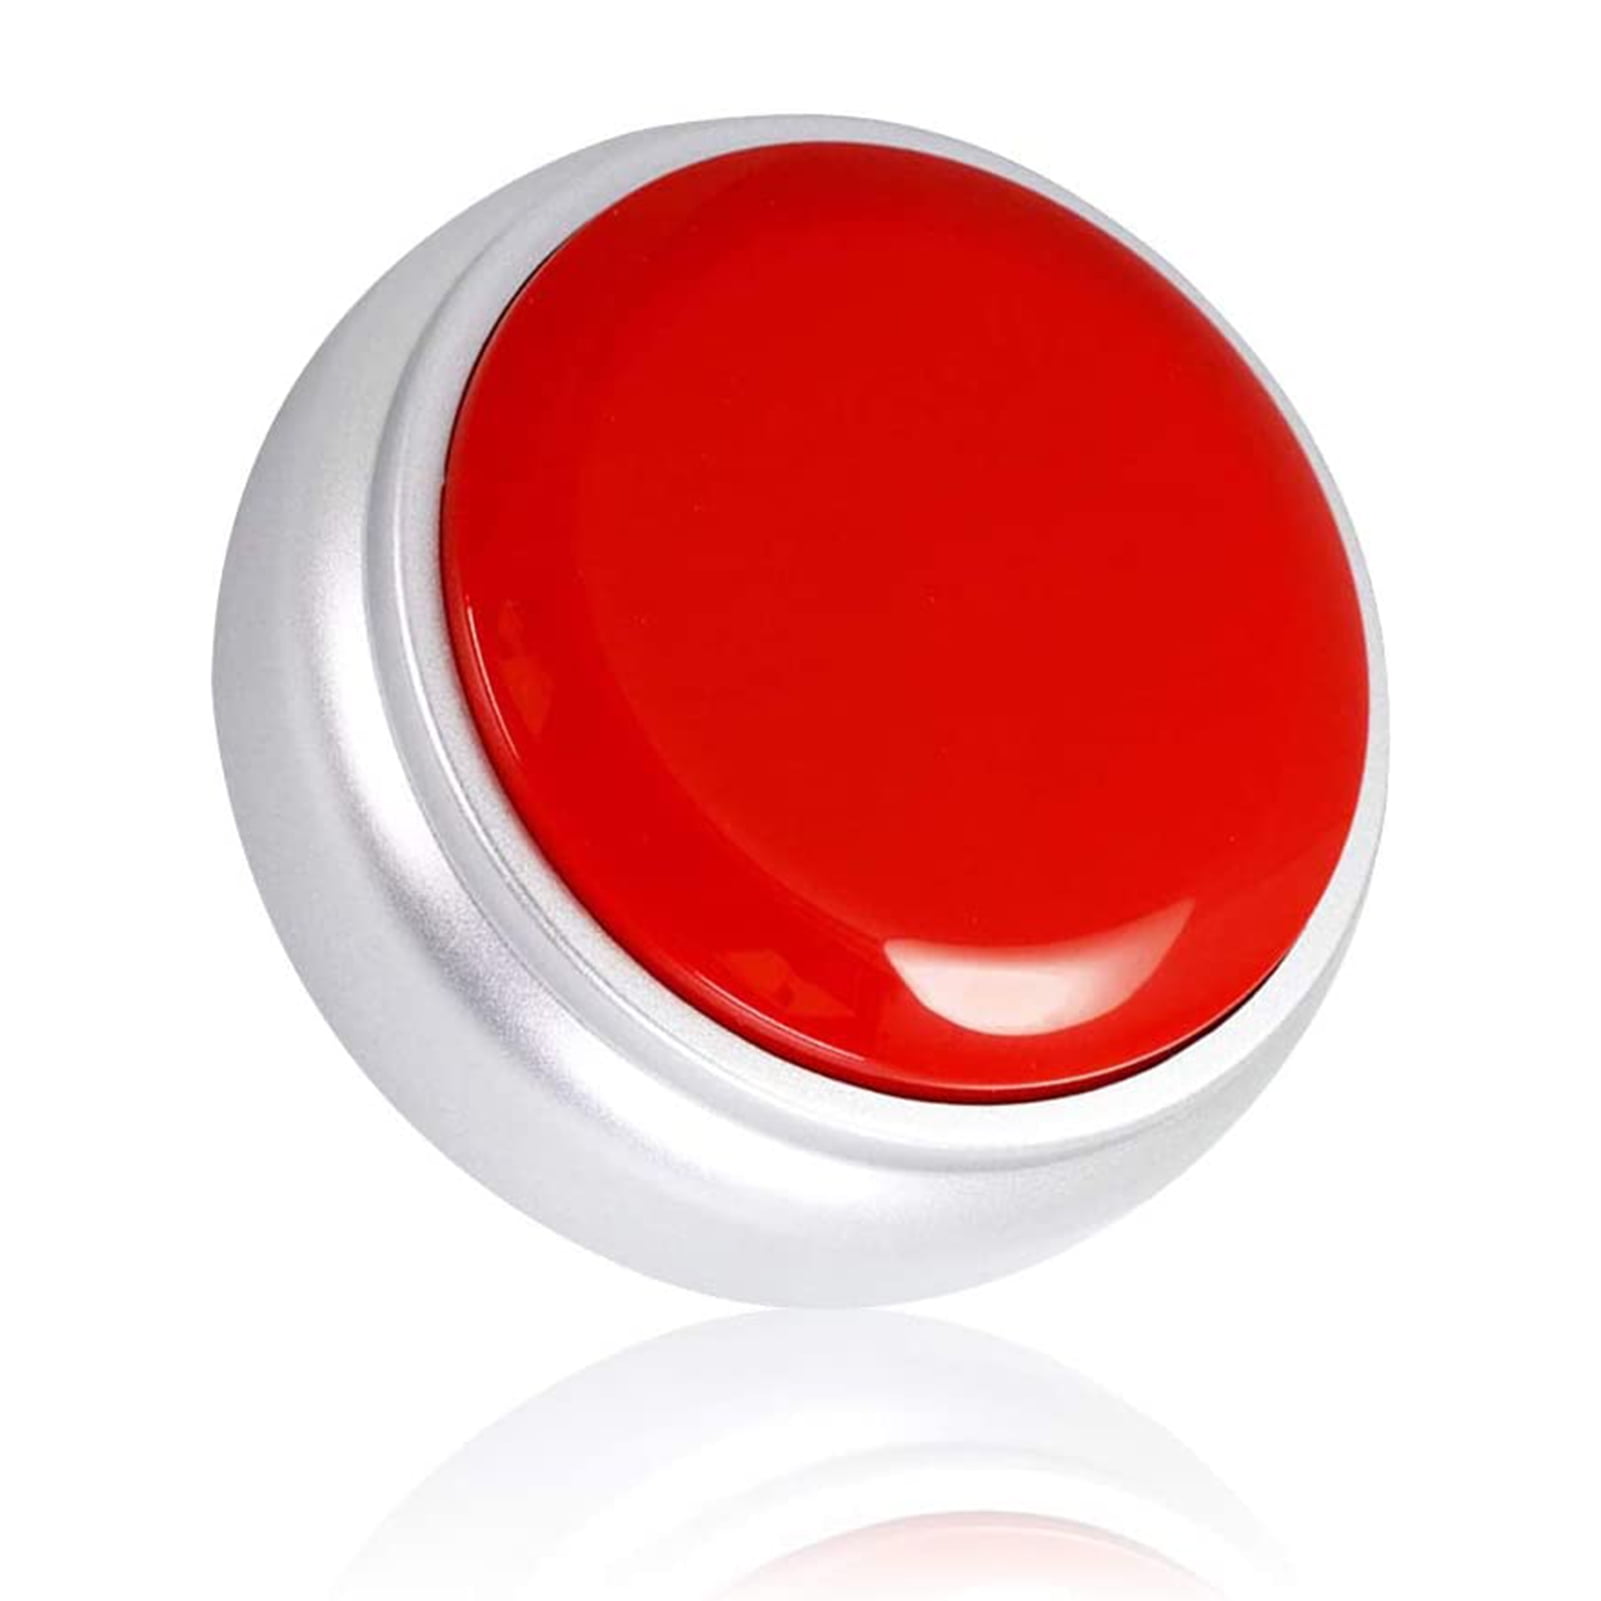 Netual Record Sound Button Custom Easy Buttons,Recordable Talking Button Office Desk Gag Gift 30 Seconds